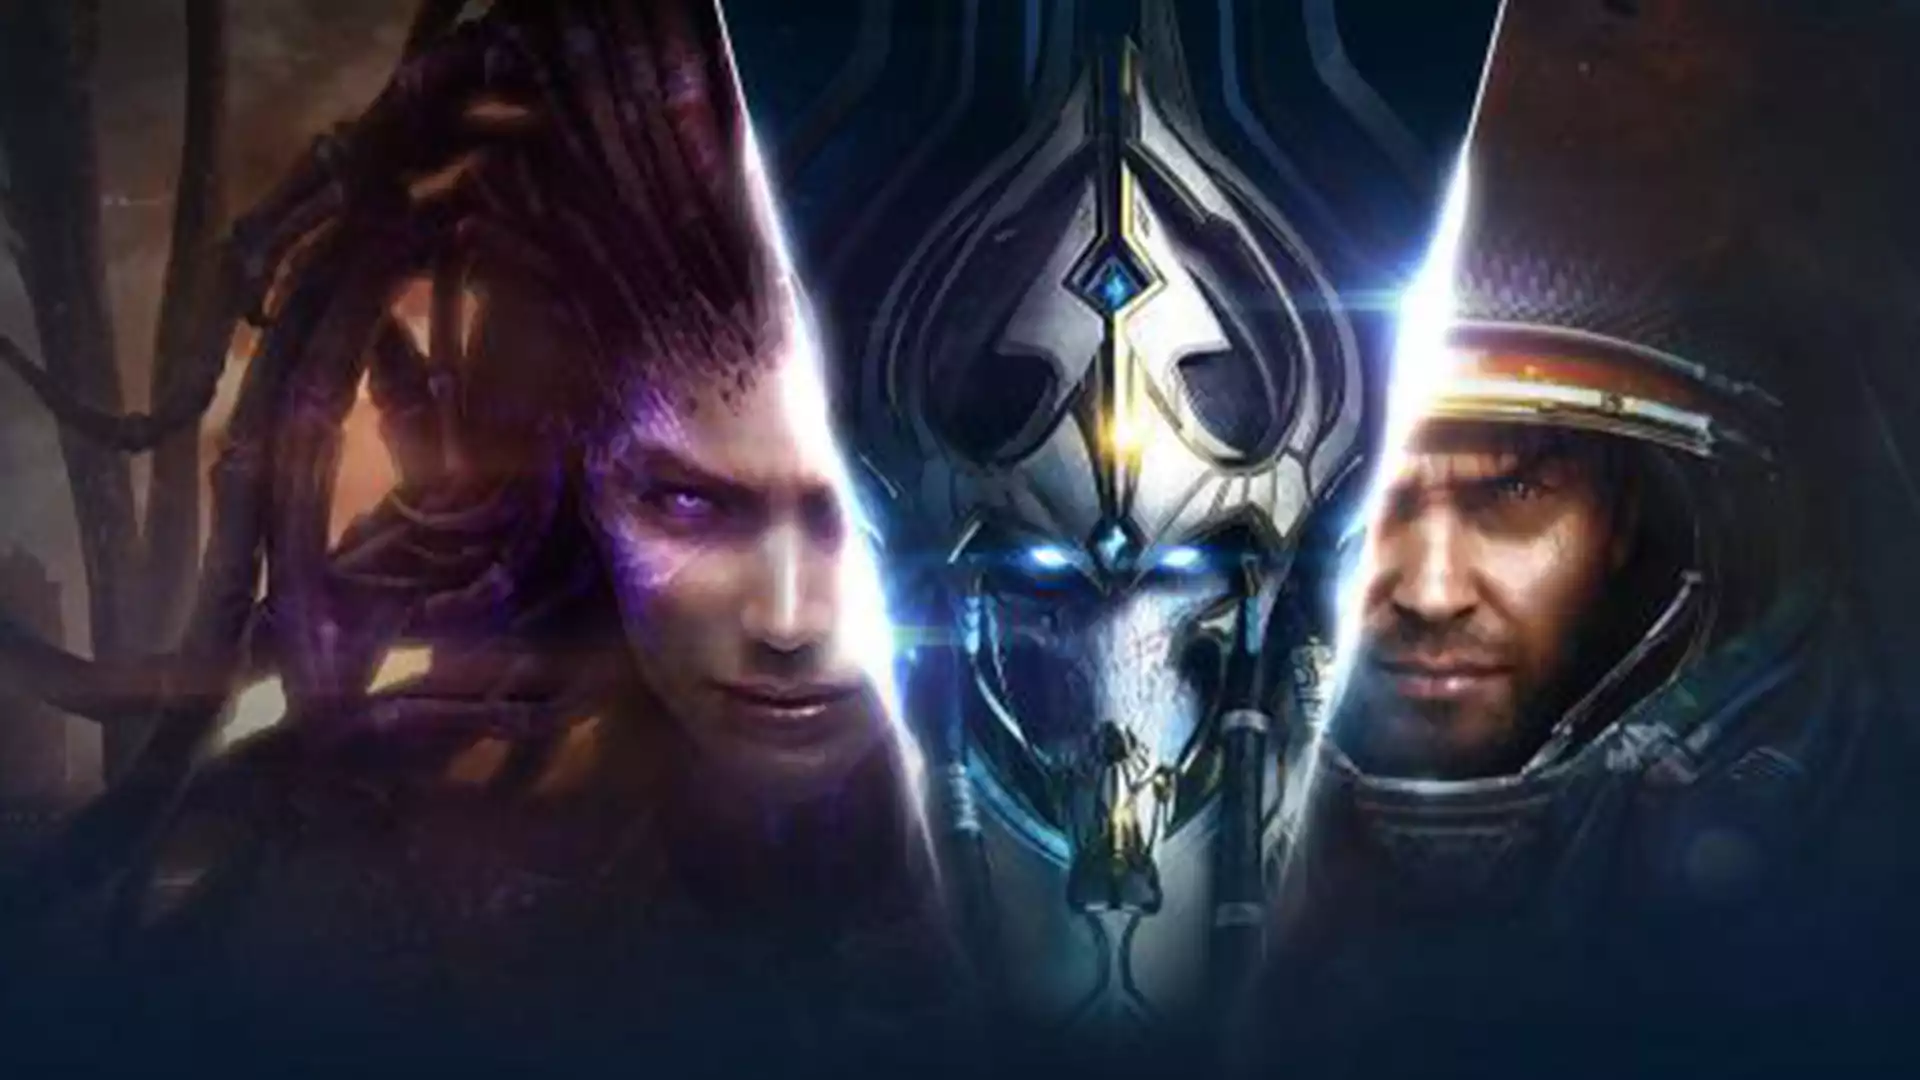 Starcraft could (and should!) benefit